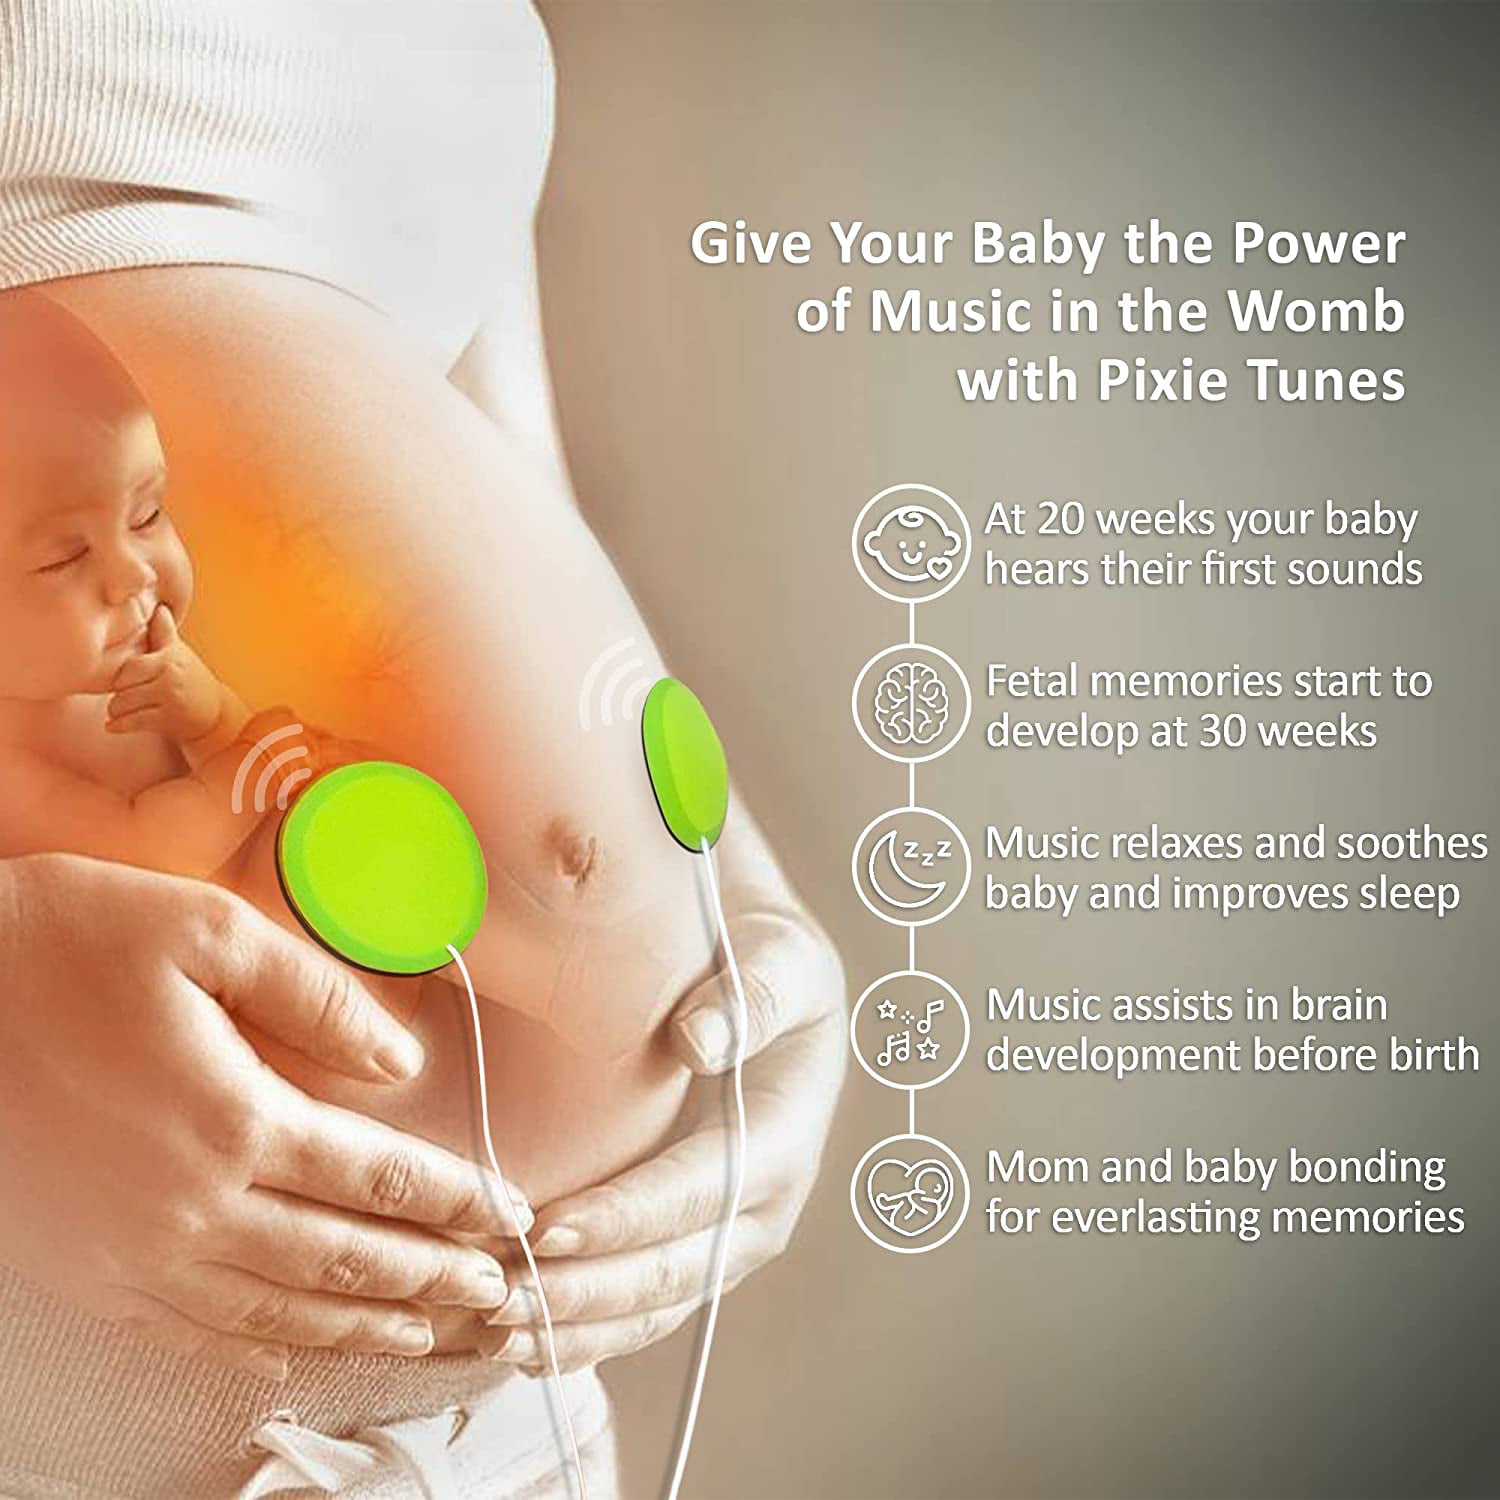 Does music during pregnancy help my baby?